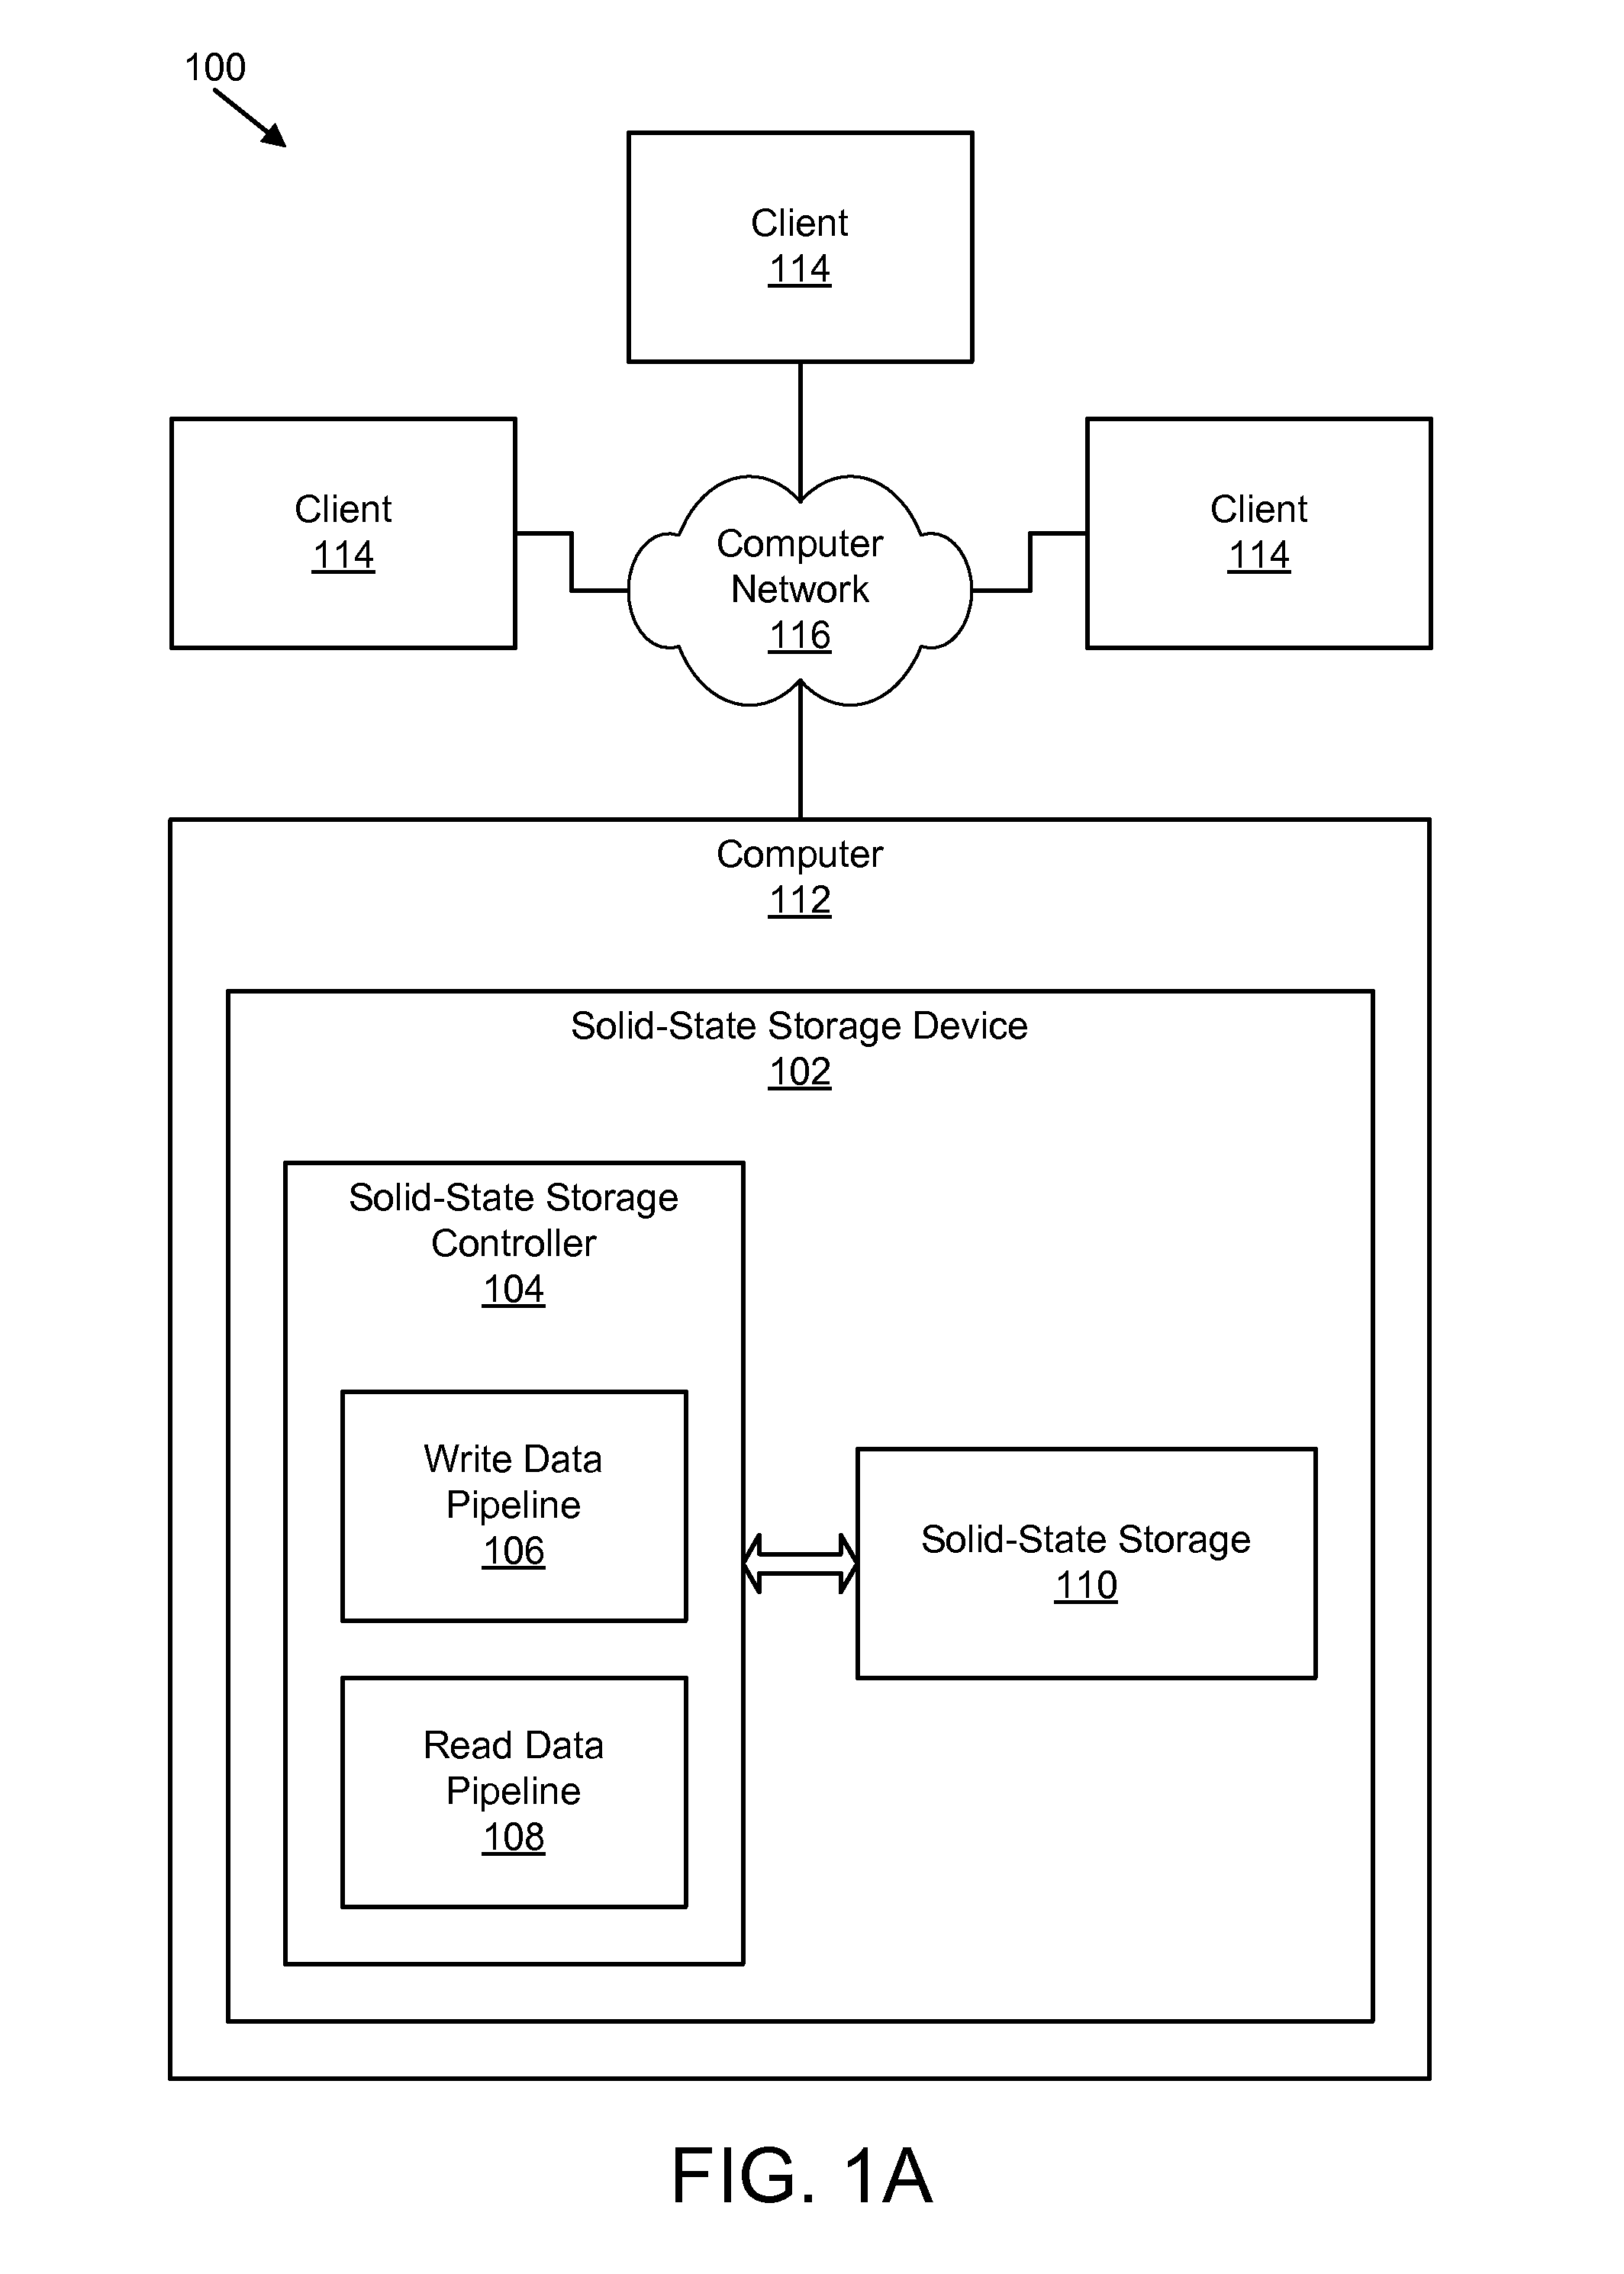 Apparatus, system, and method for managing data using a data pipeline